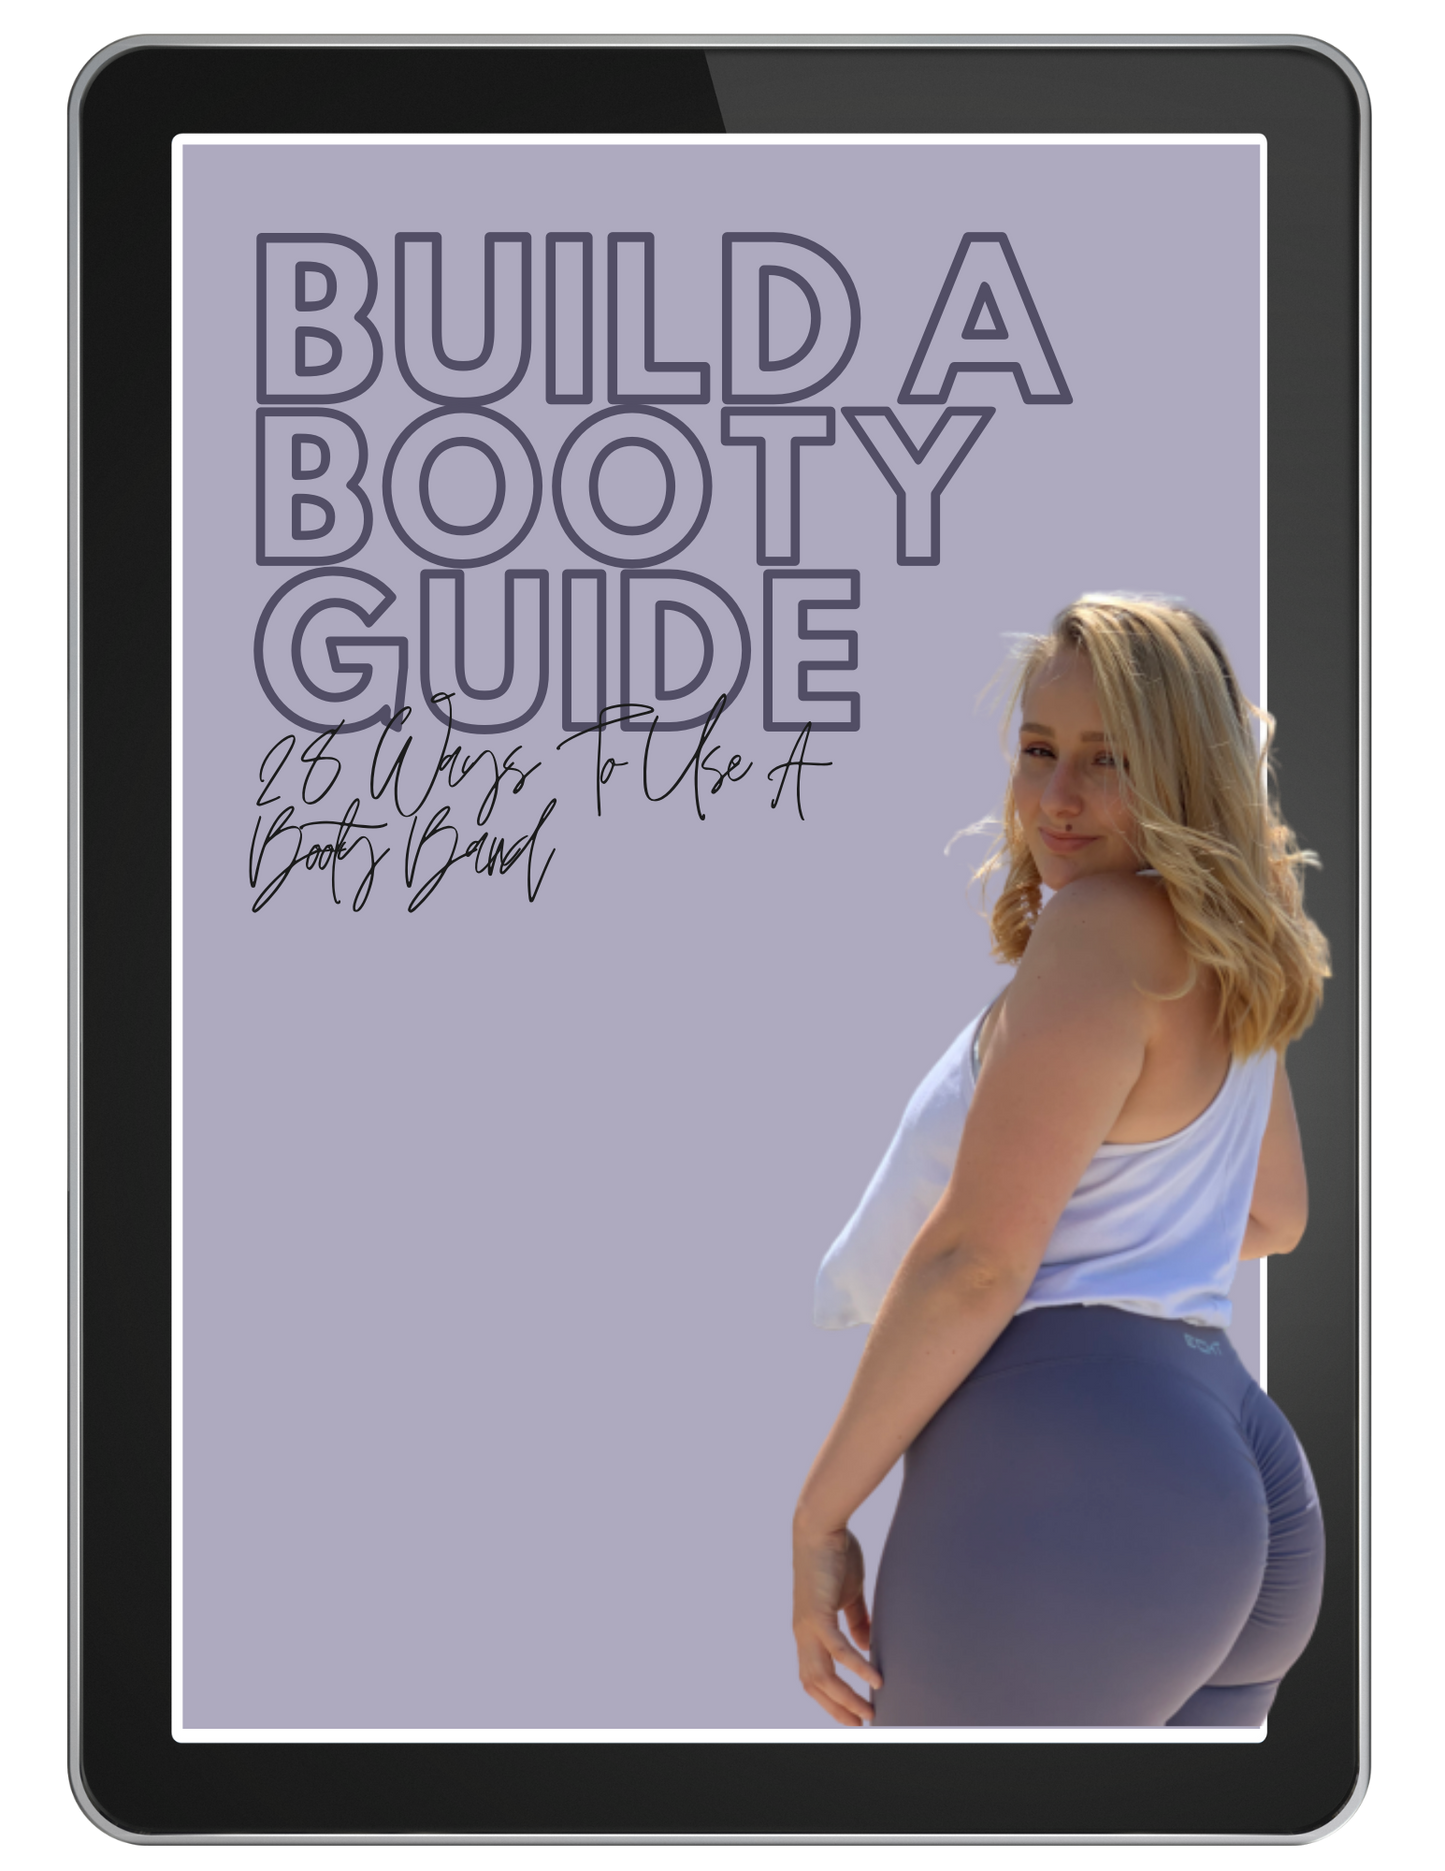 Booty Building Guide